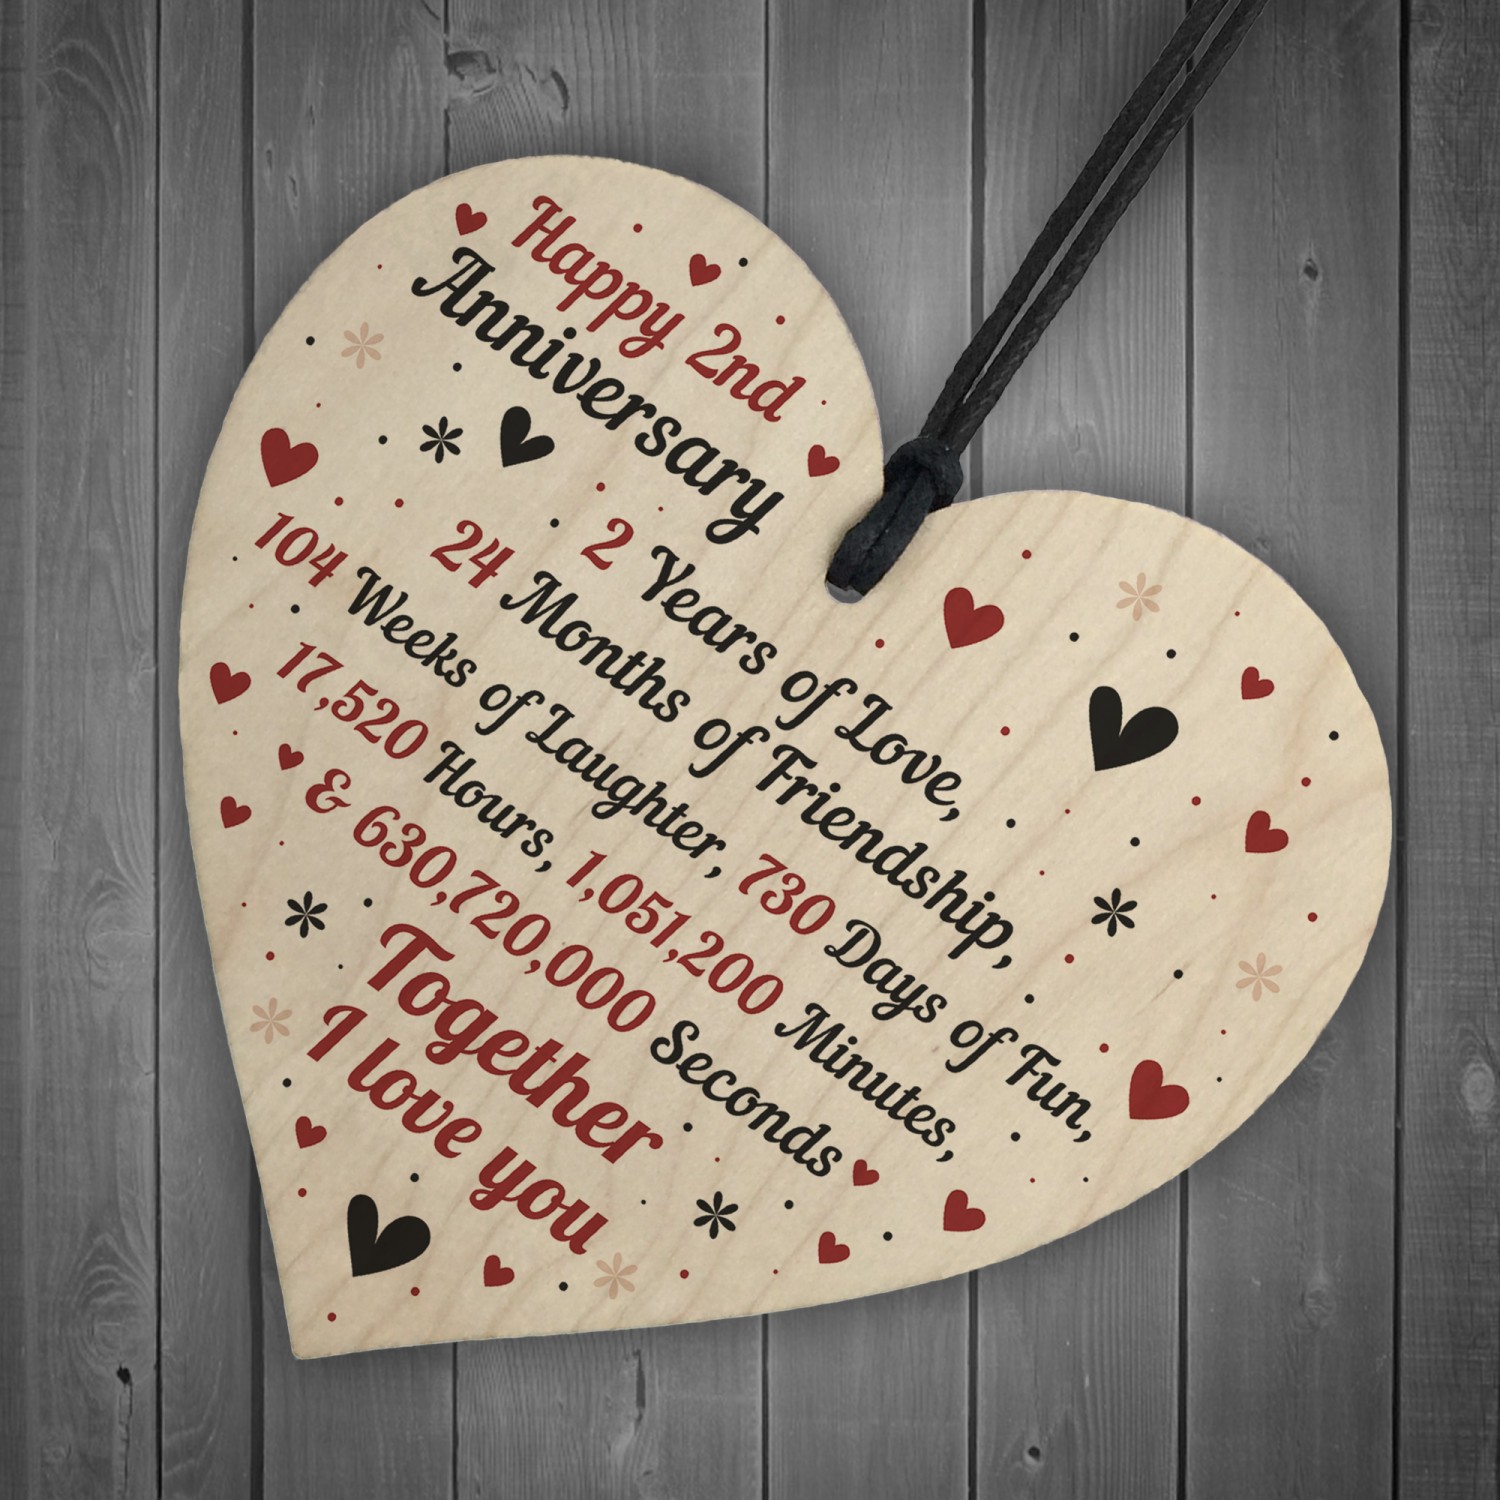 2nd Wedding Anniversary Gifts For Him
 2nd Wedding Anniversary Gift For Him Her Wood Heart Keepsake